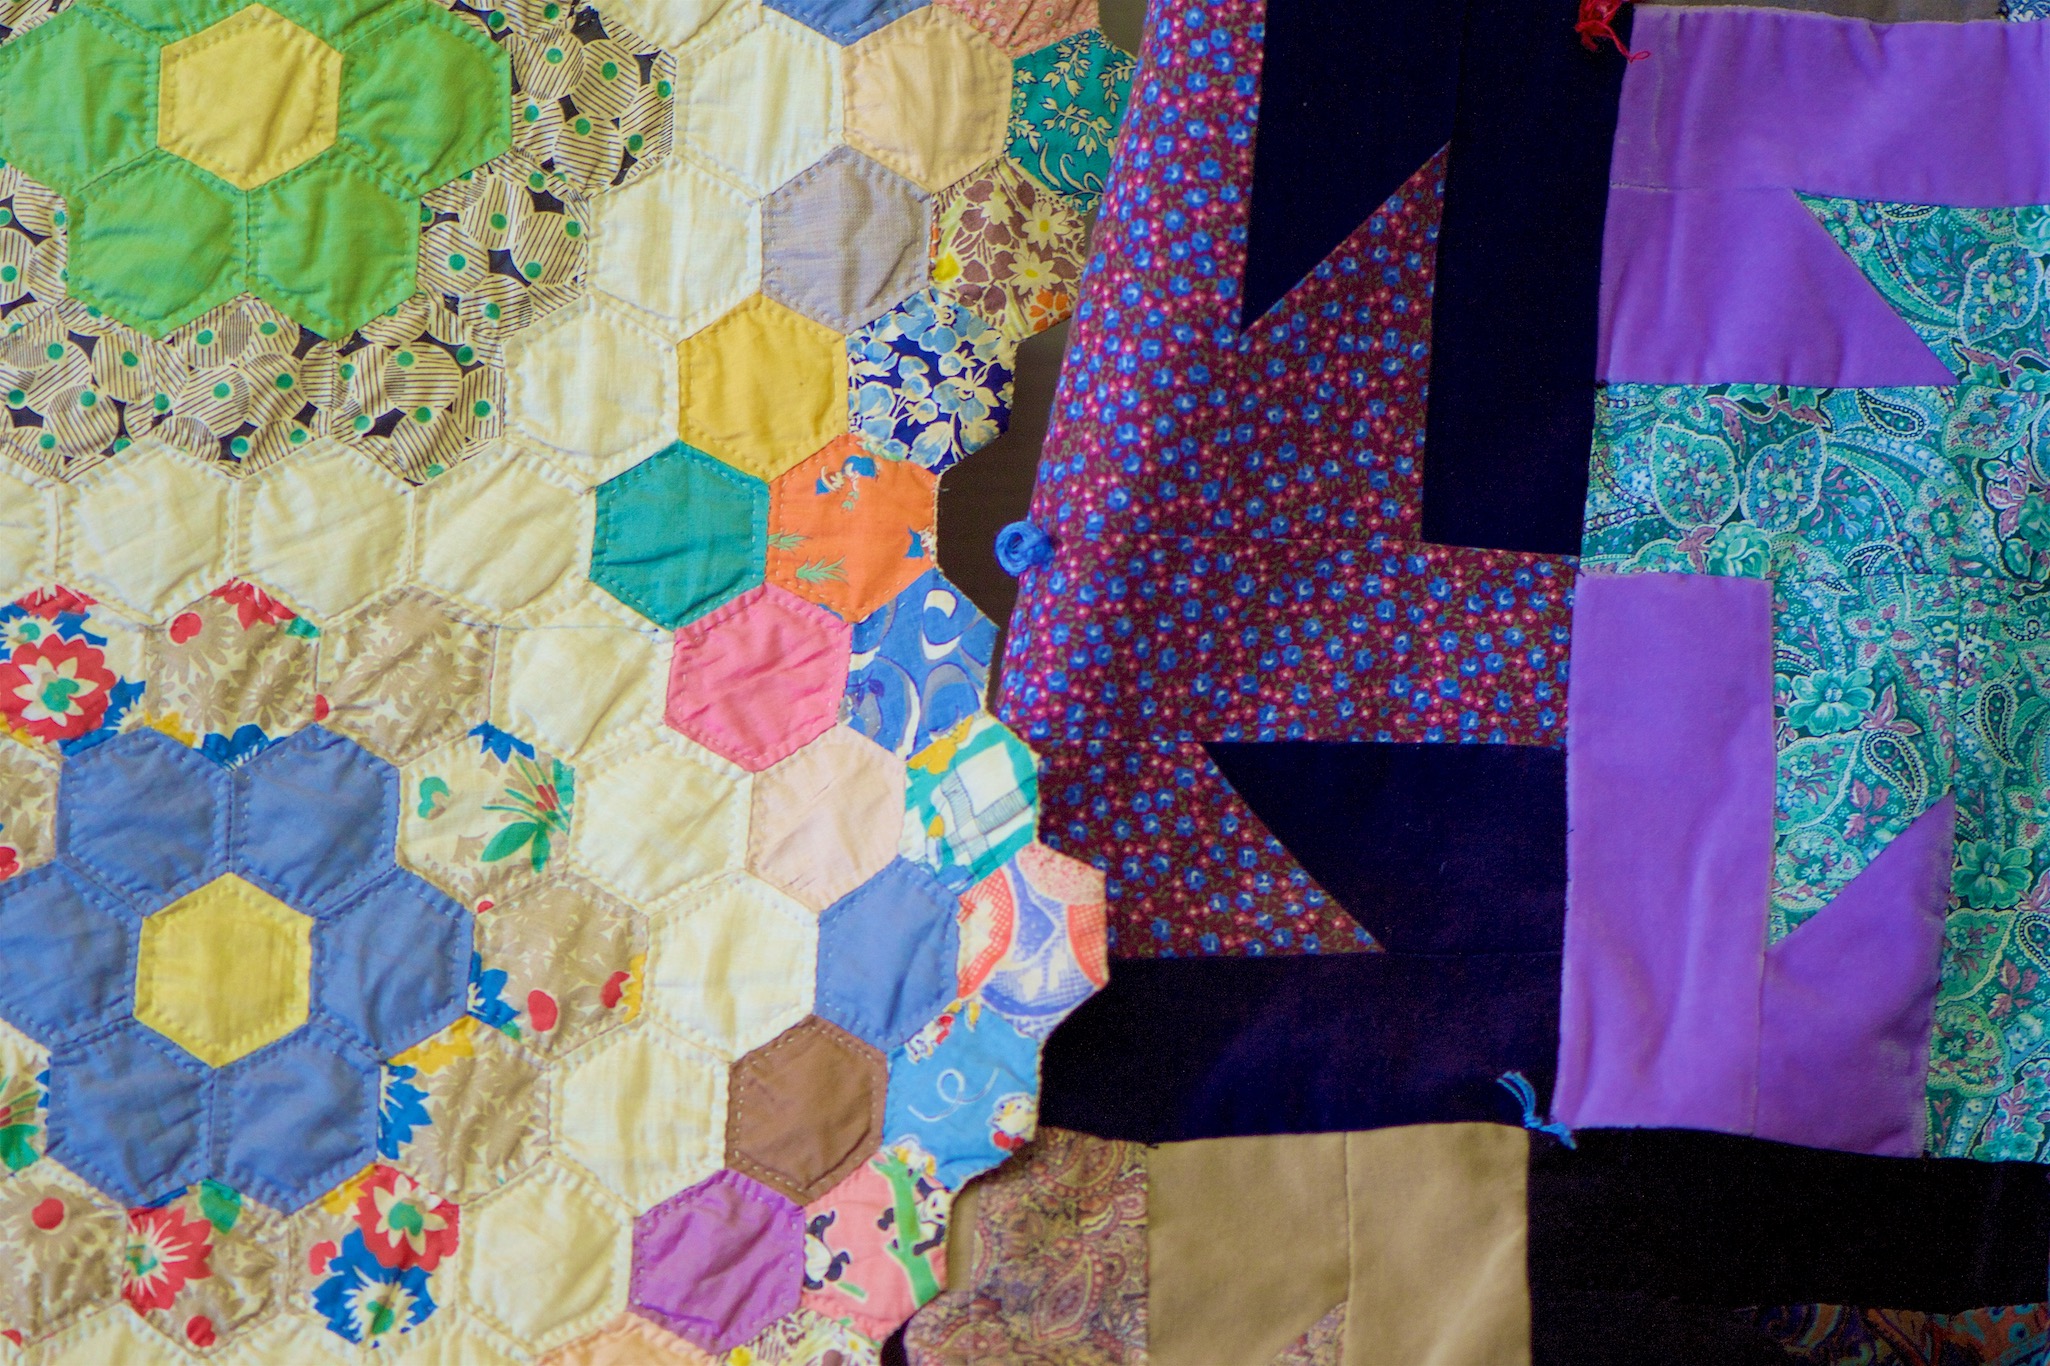 Prize Winning Quilts at the New York State Fair in Syracuse, New York